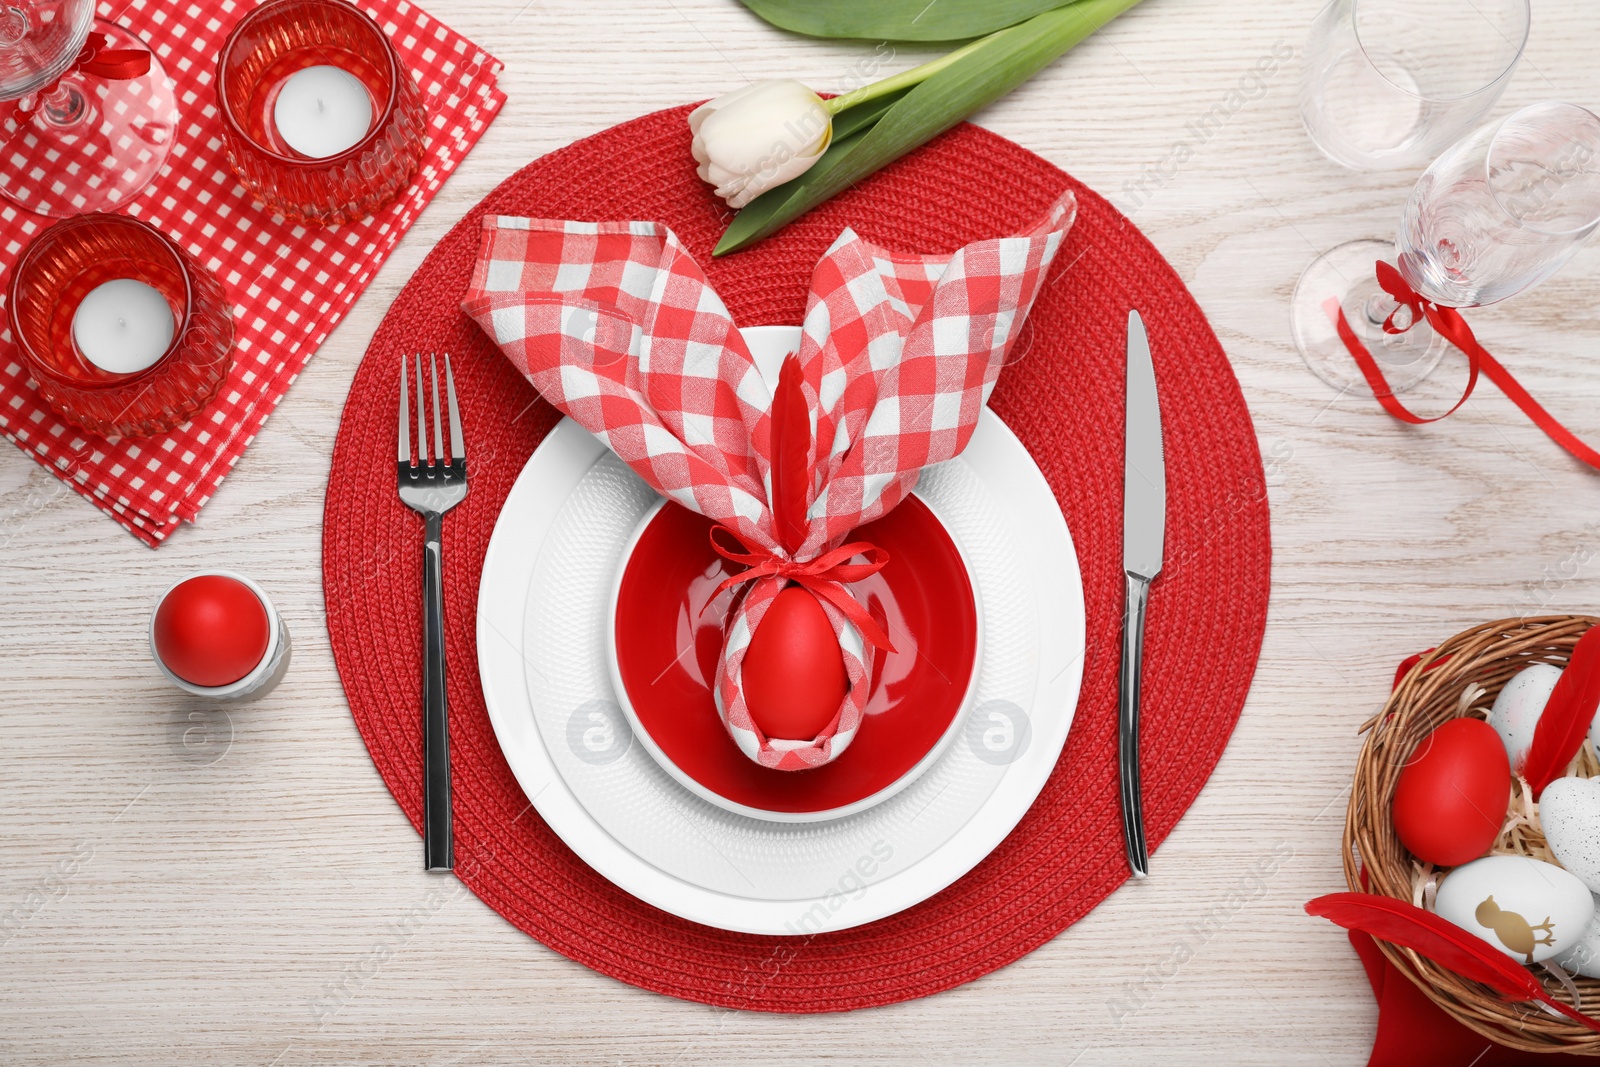 Photo of Festive table setting with bunny ears made of red egg and napkin, flat lay Easter celebration